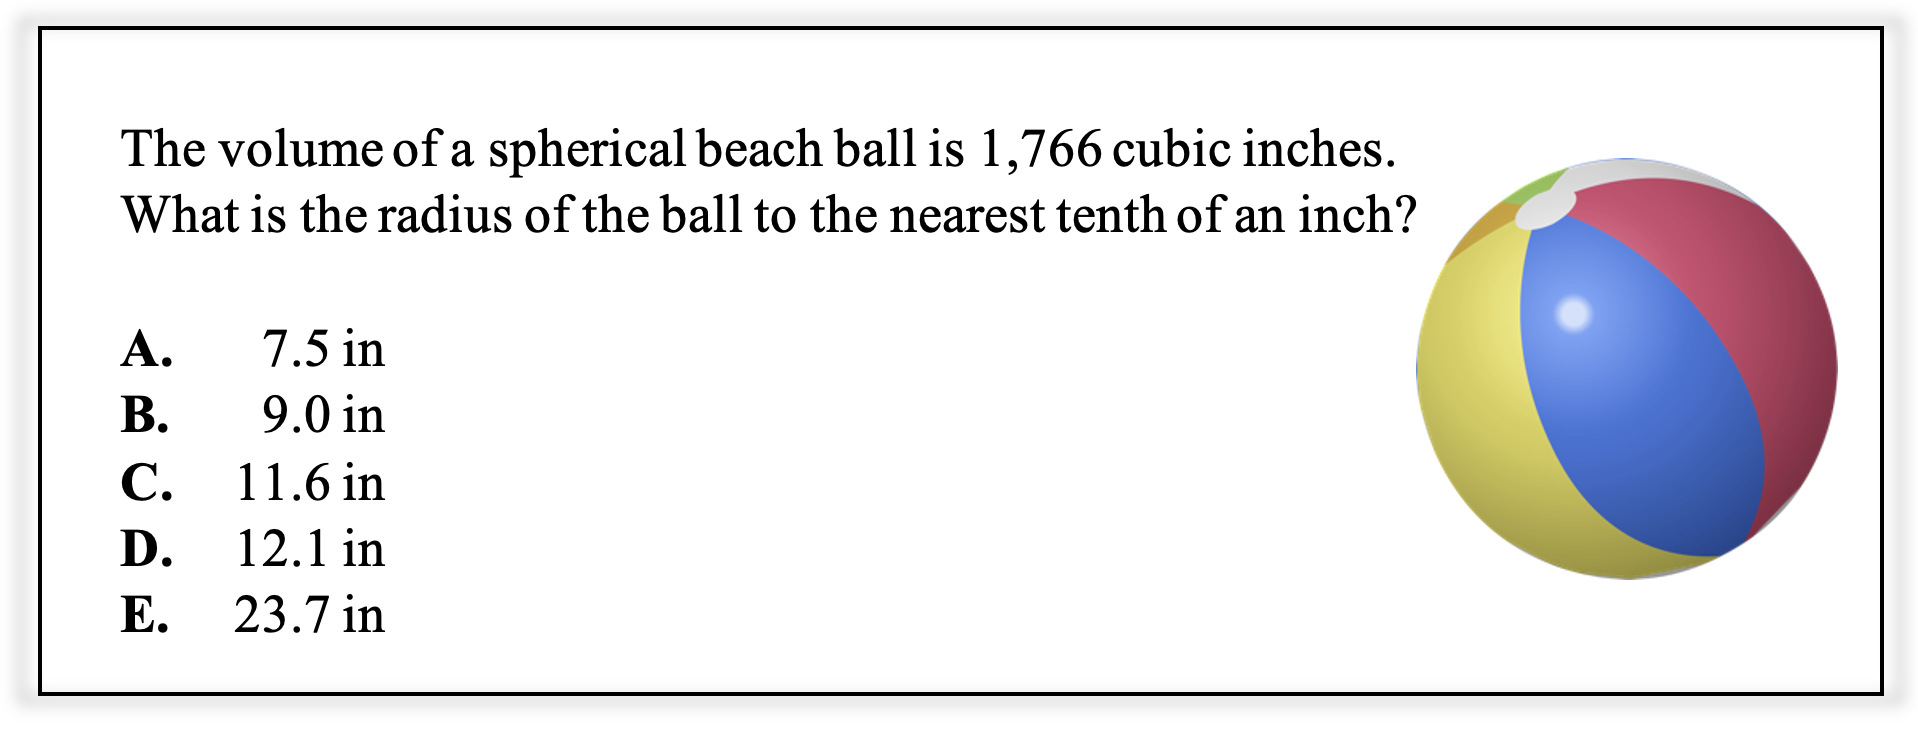 A math problem reads: The volume of a spherical beach ball is 1,766 cubic inches. What is the radius of the ball to the nearest tenth of an inch?

The answer choices are:
A.	    7.5 in
B.	    9.0 in
C.	  11.6 in
D.	  12.1 in
E.	  23.7 in
